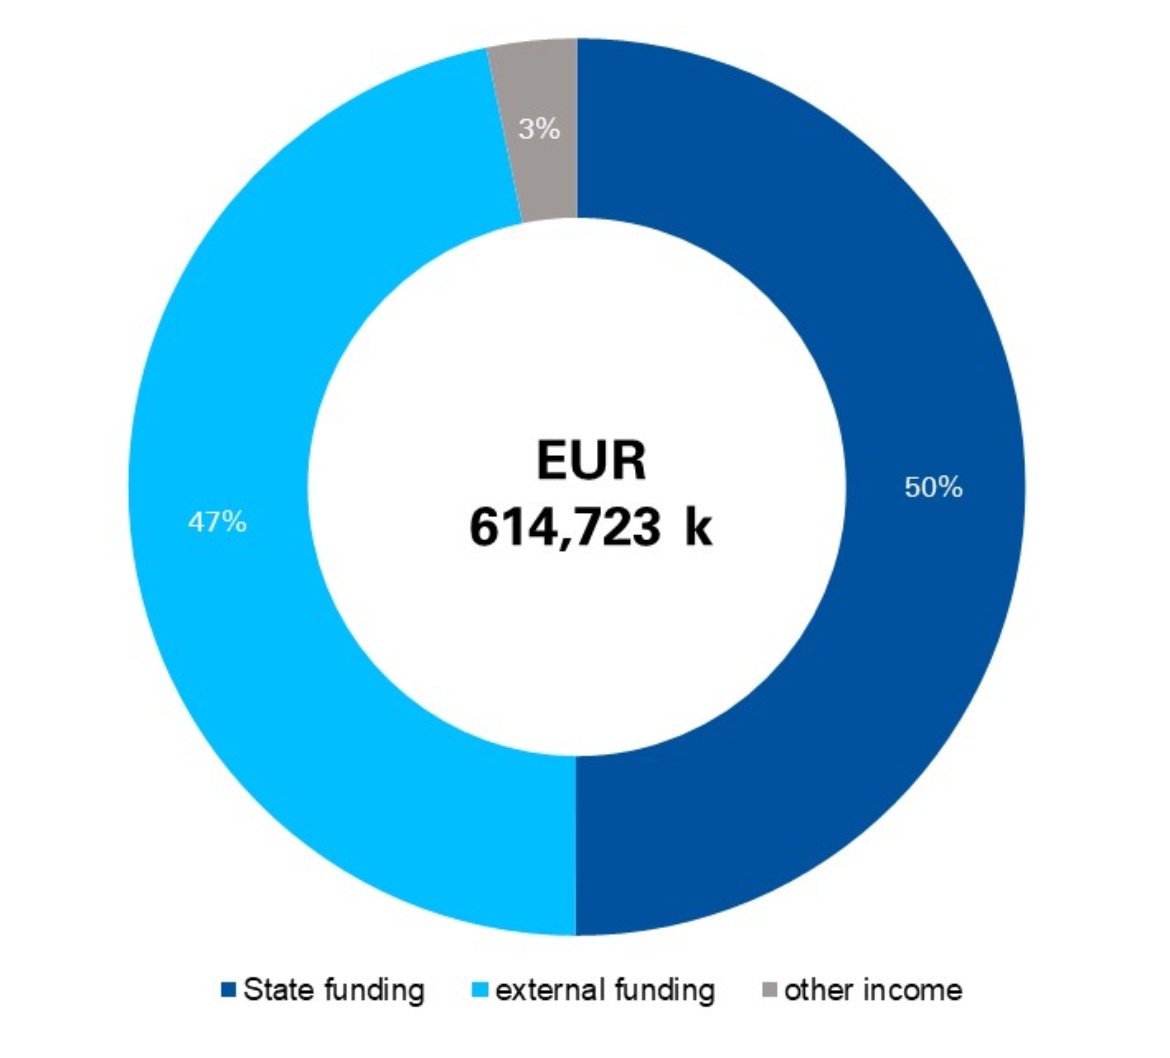 The university's total budget amounts to 614,723,000 Euro. Of this, the state subsidy including investments amounts to 50 percent, third-party funds 47 percent and other income 3 percent.